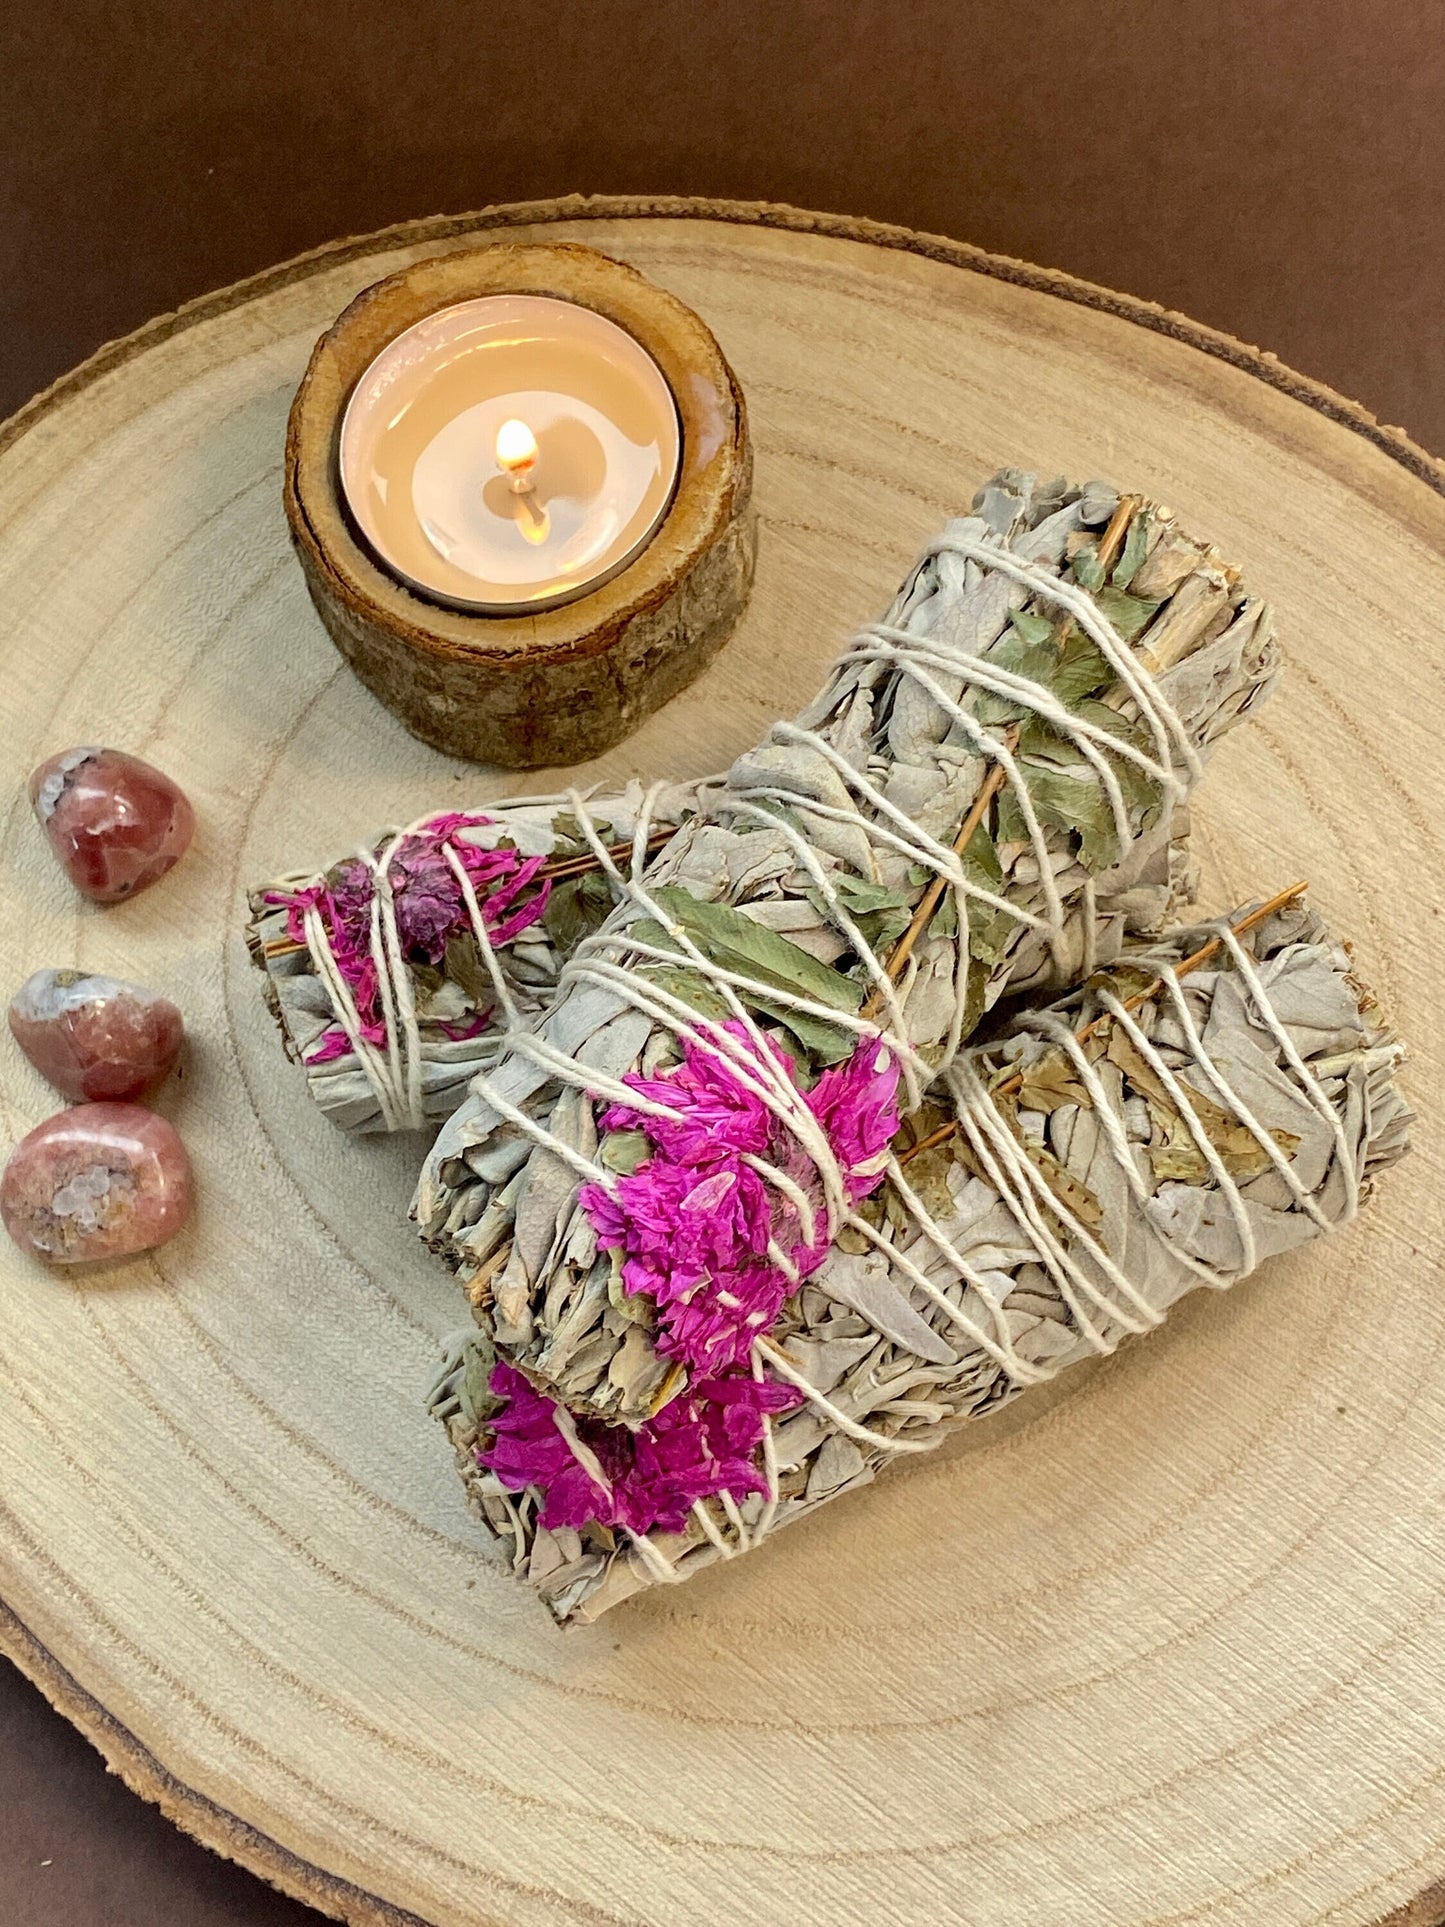 Sage Smudge Stick with Dahlia, Cleanse your home, crystals and you, Smudge stick for transformation, transition and change